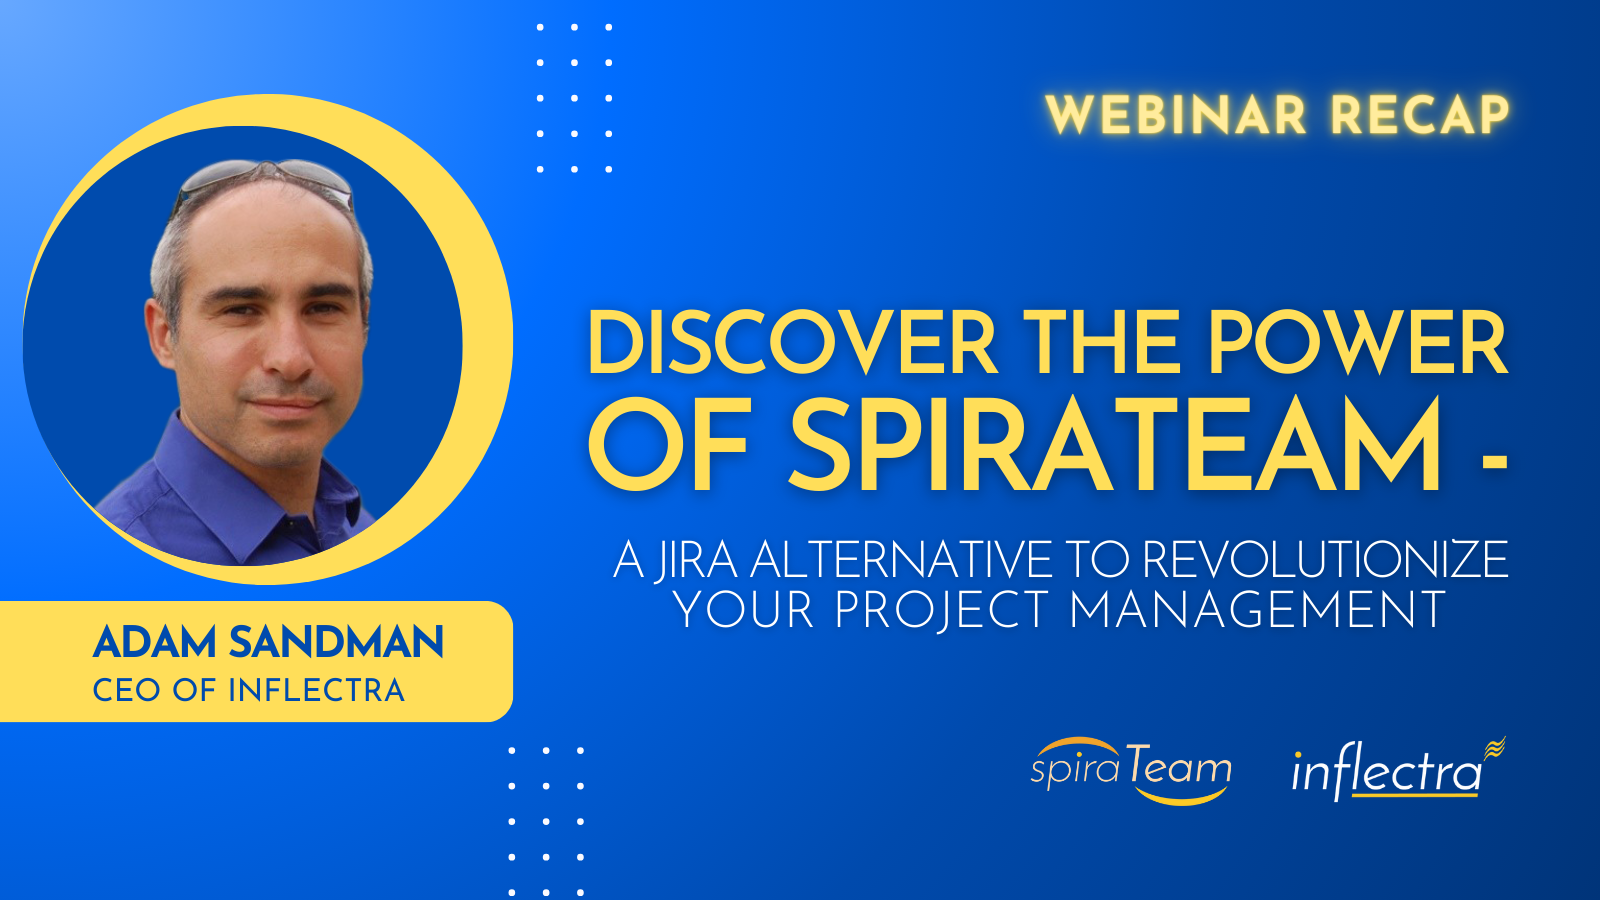 inflectra-recap-blog-discover-the-power-of-spirateam-a-jira-alternative-to-revolutionize-your-project-management-image